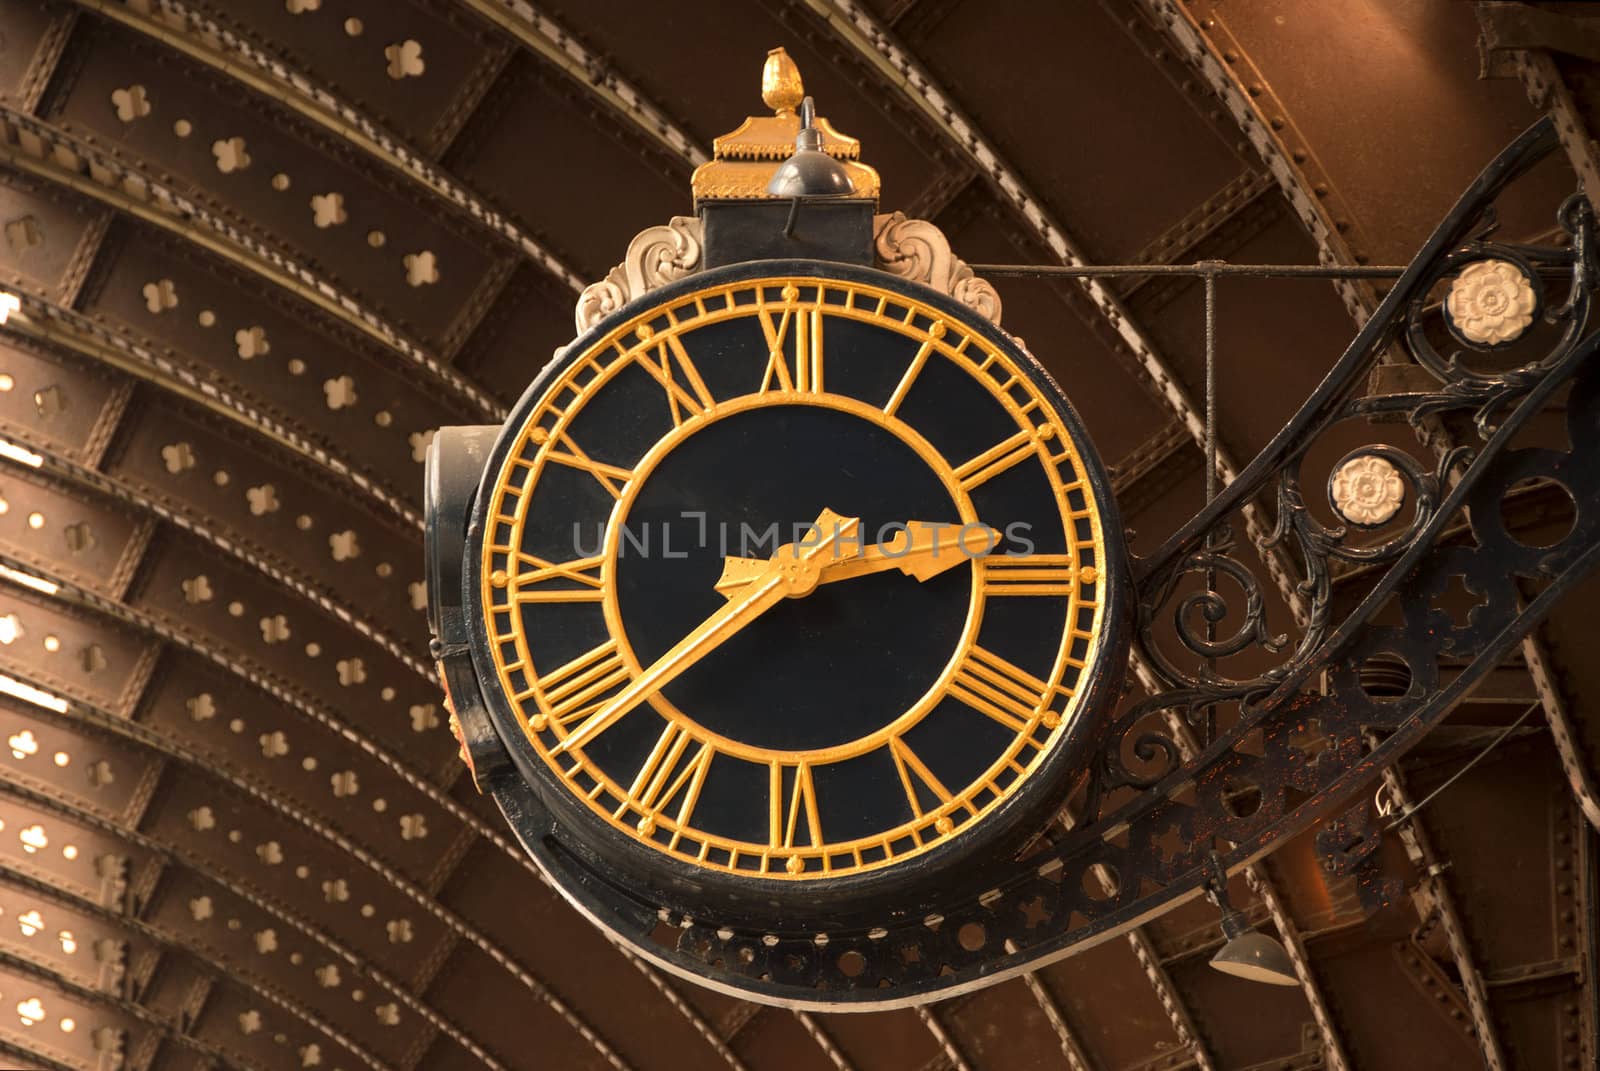 An Antique Black and Gold Railway Station Clock